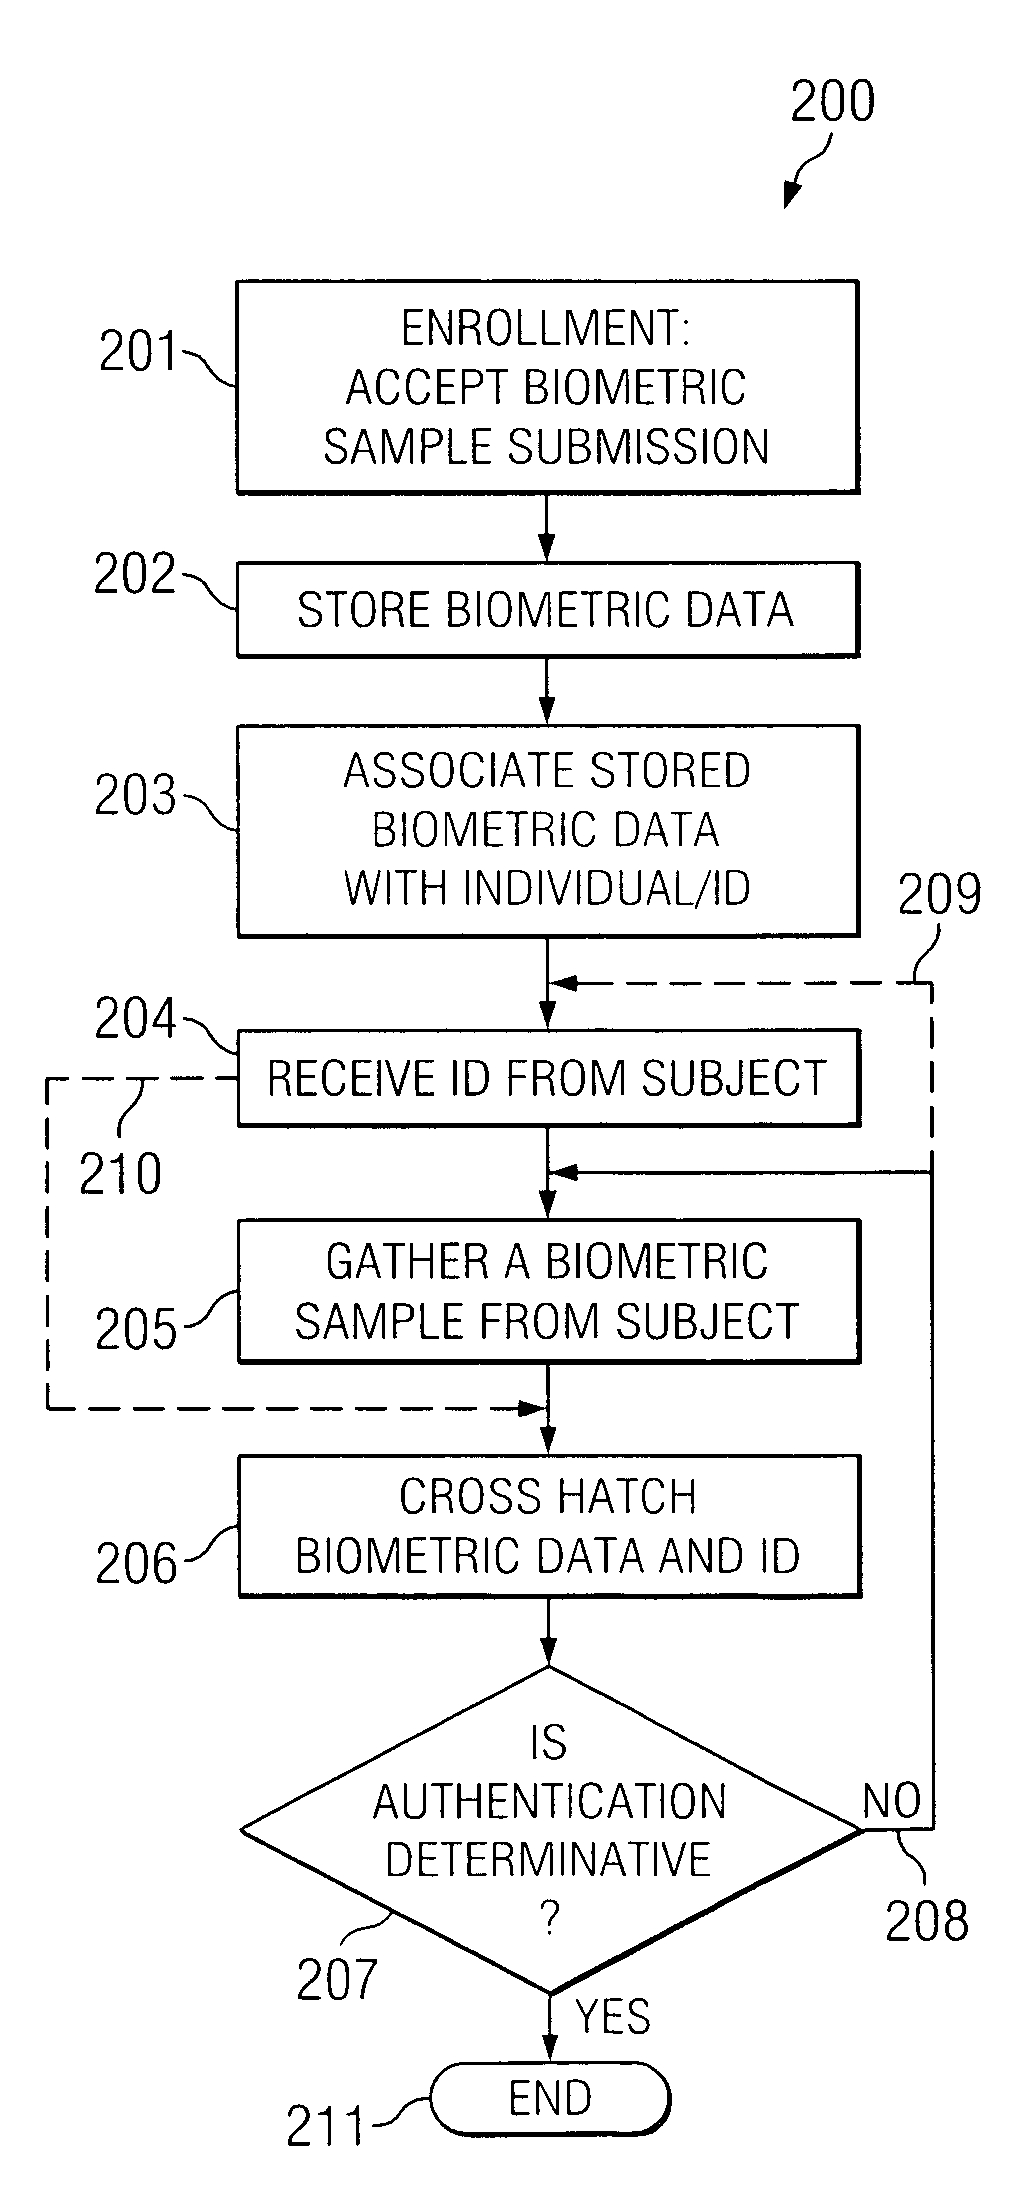 Systems and methods for cross-hatching biometrics with other identifying data